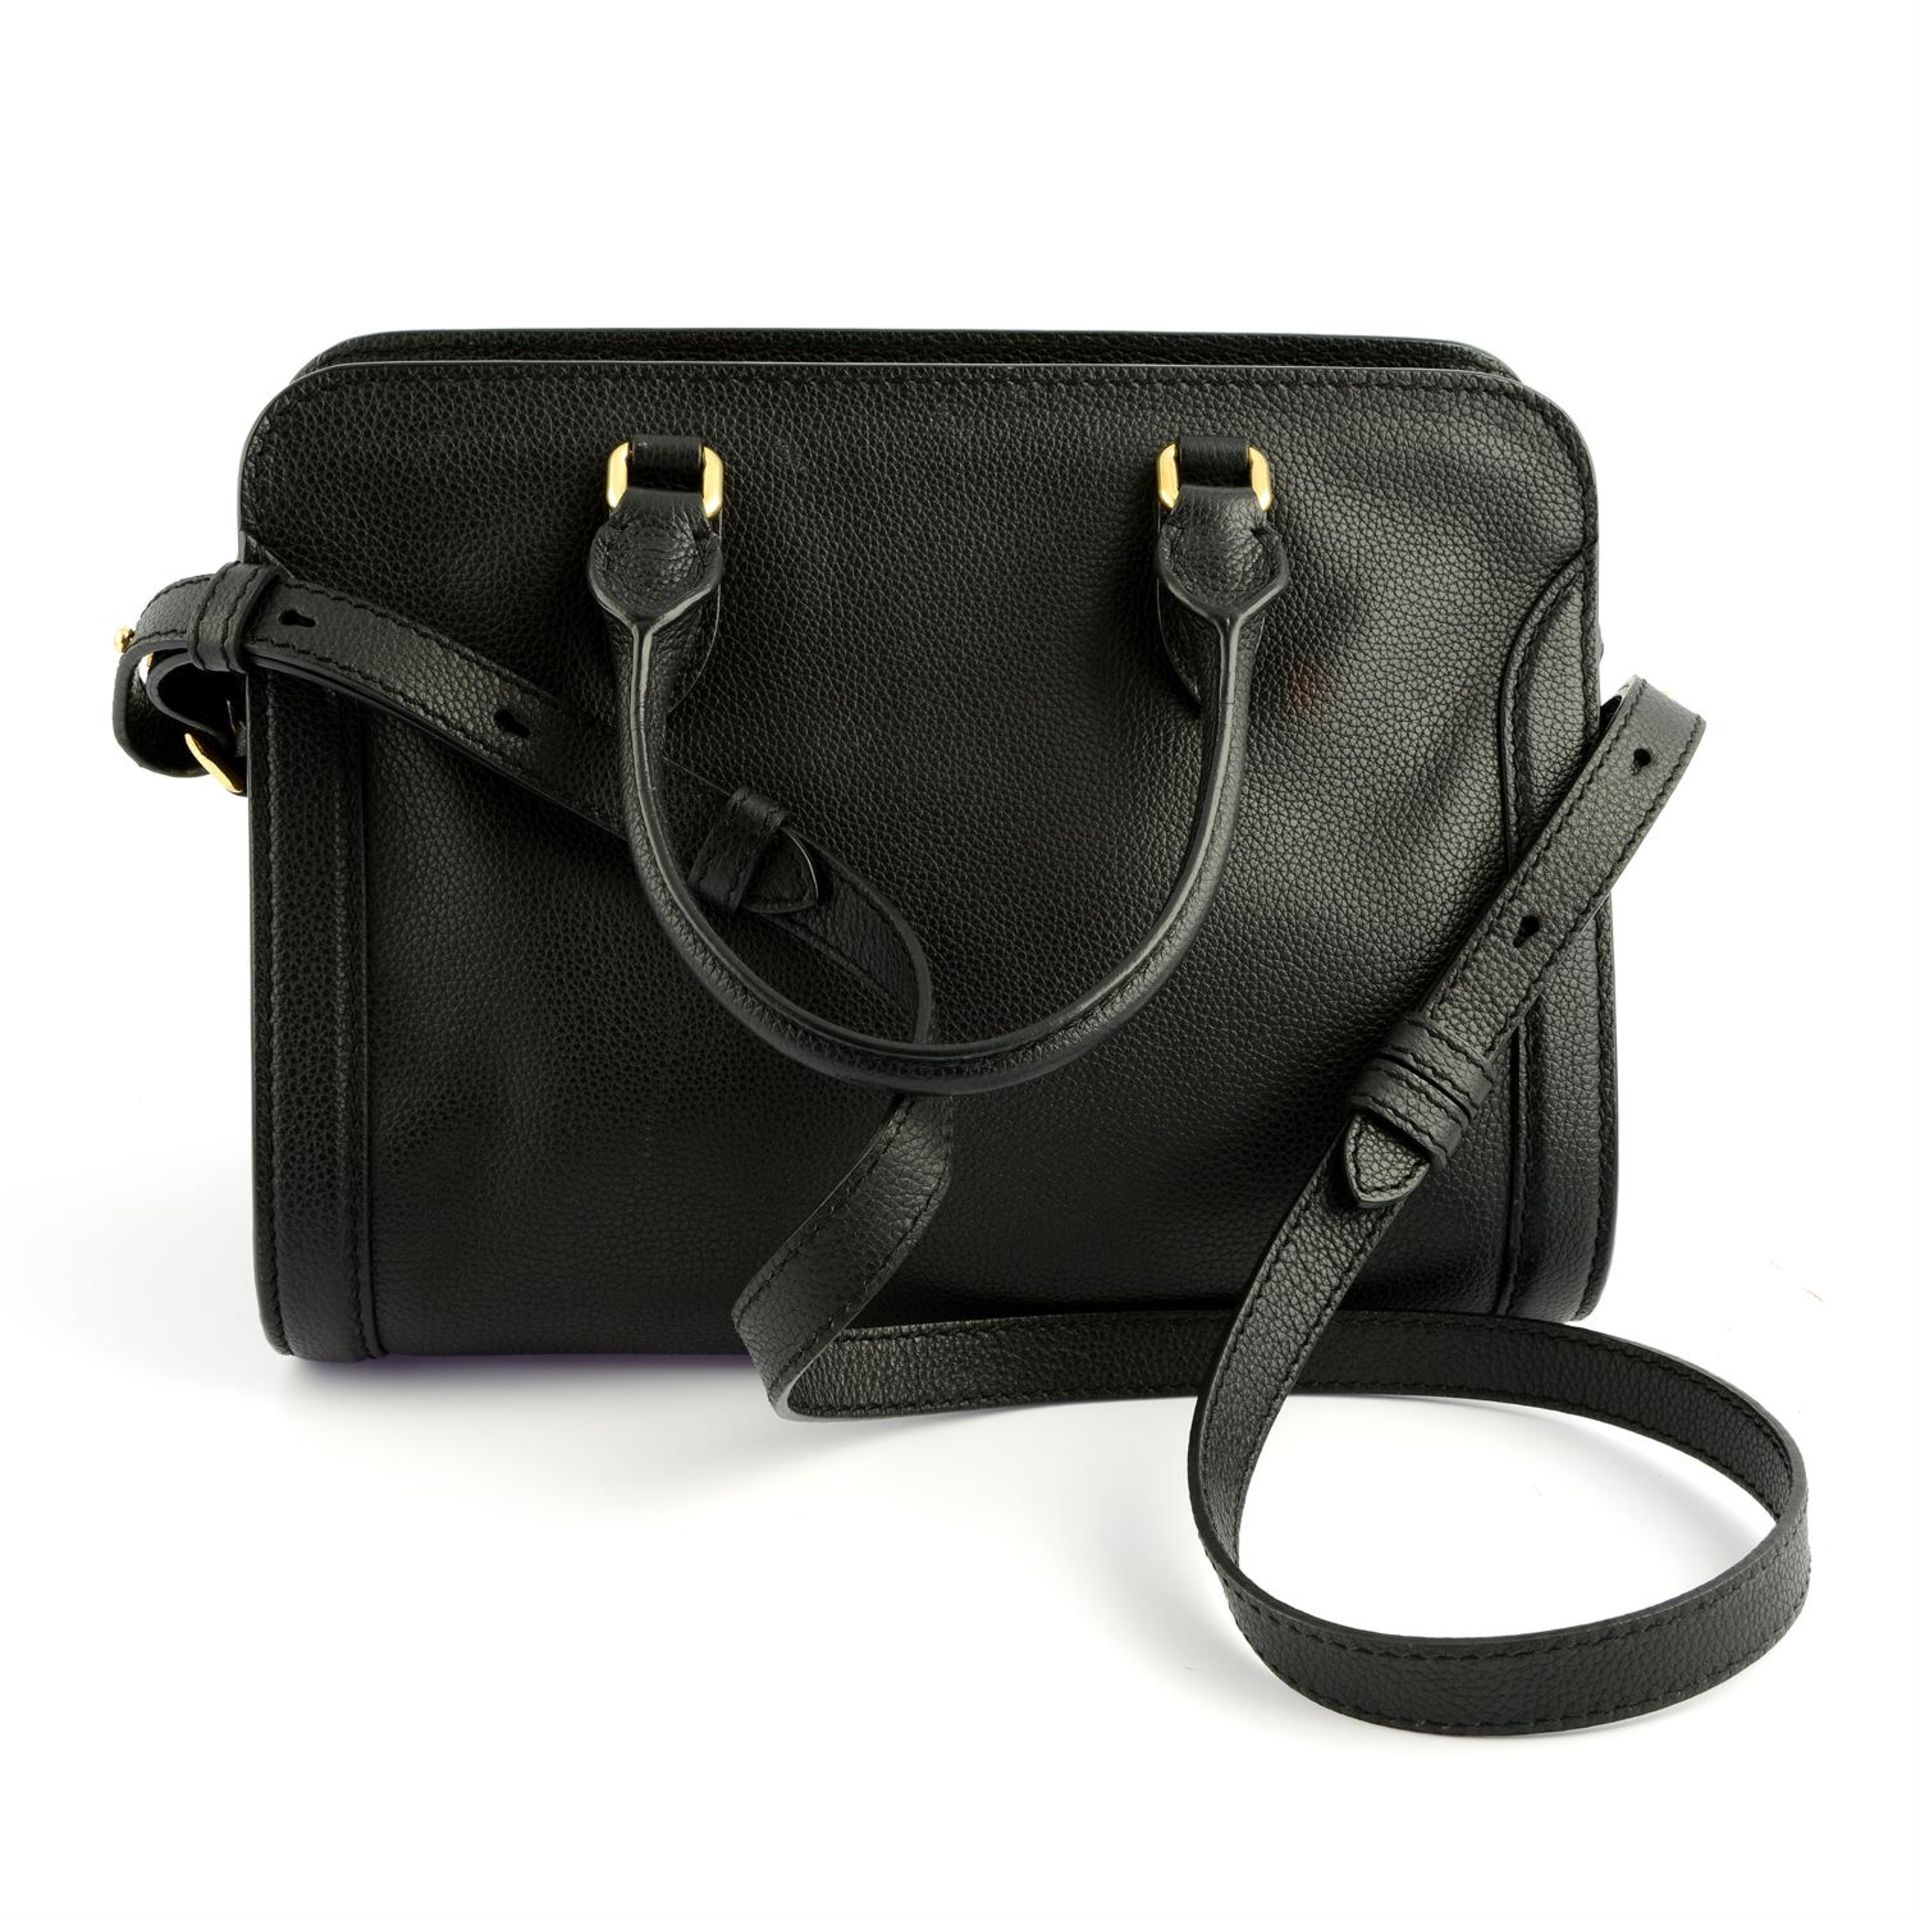 ALEXANDER MCQUEEN - a black leather Skull Padlock tote. - Image 2 of 5